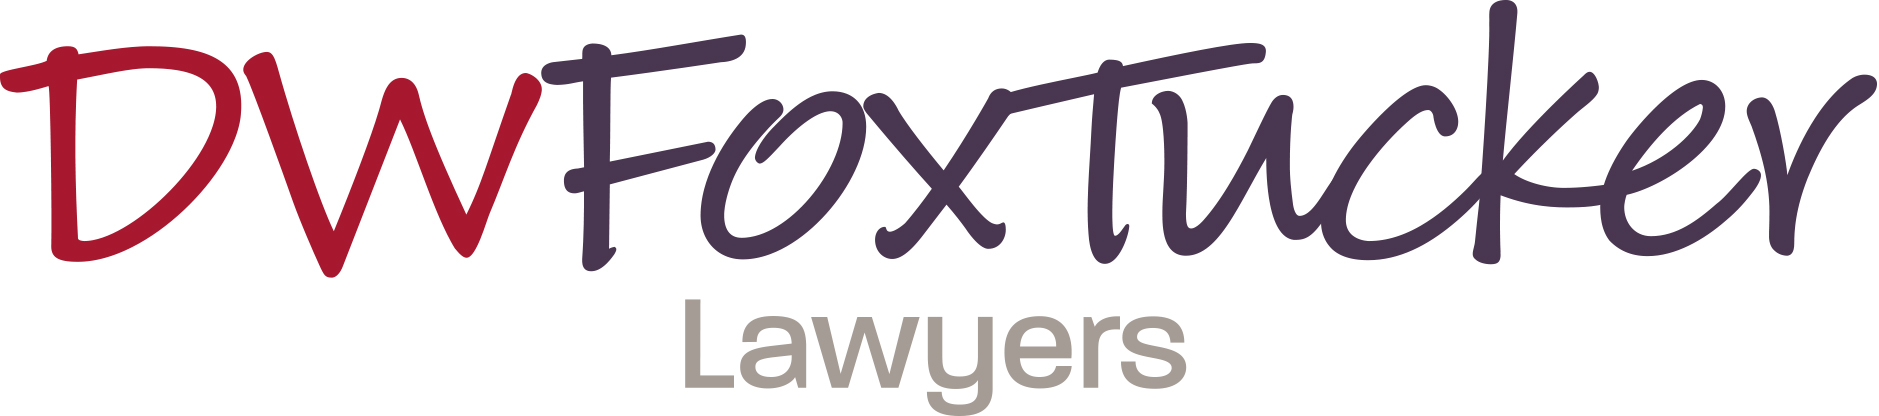 DW Fox Tucker Lawyers - Cyber Security and why it matters